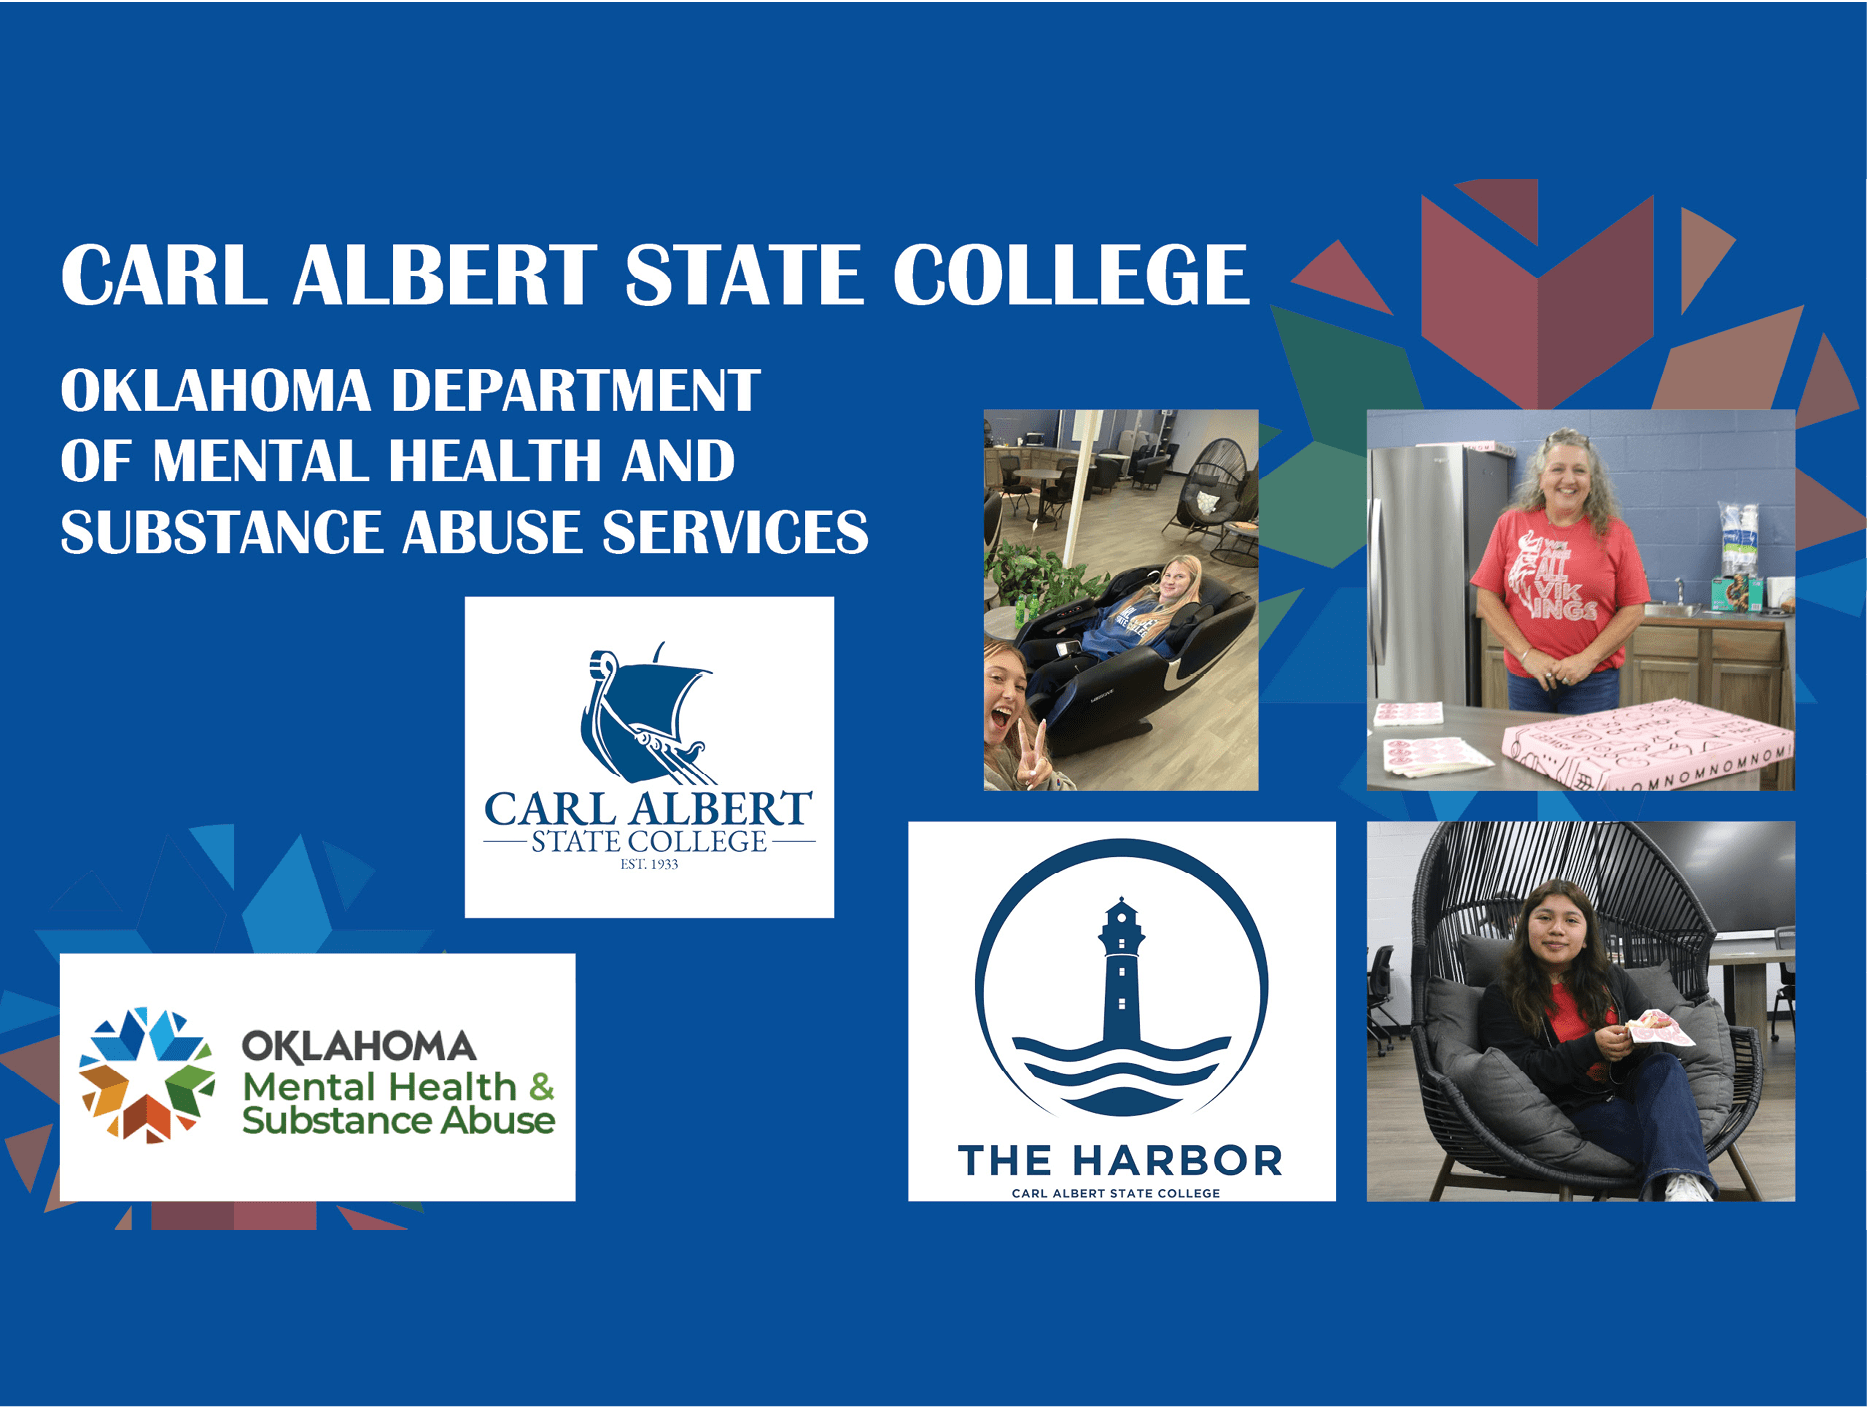 Carl Albert State College and the Oklahoma Department of Mental Health and Substance Abuse Services